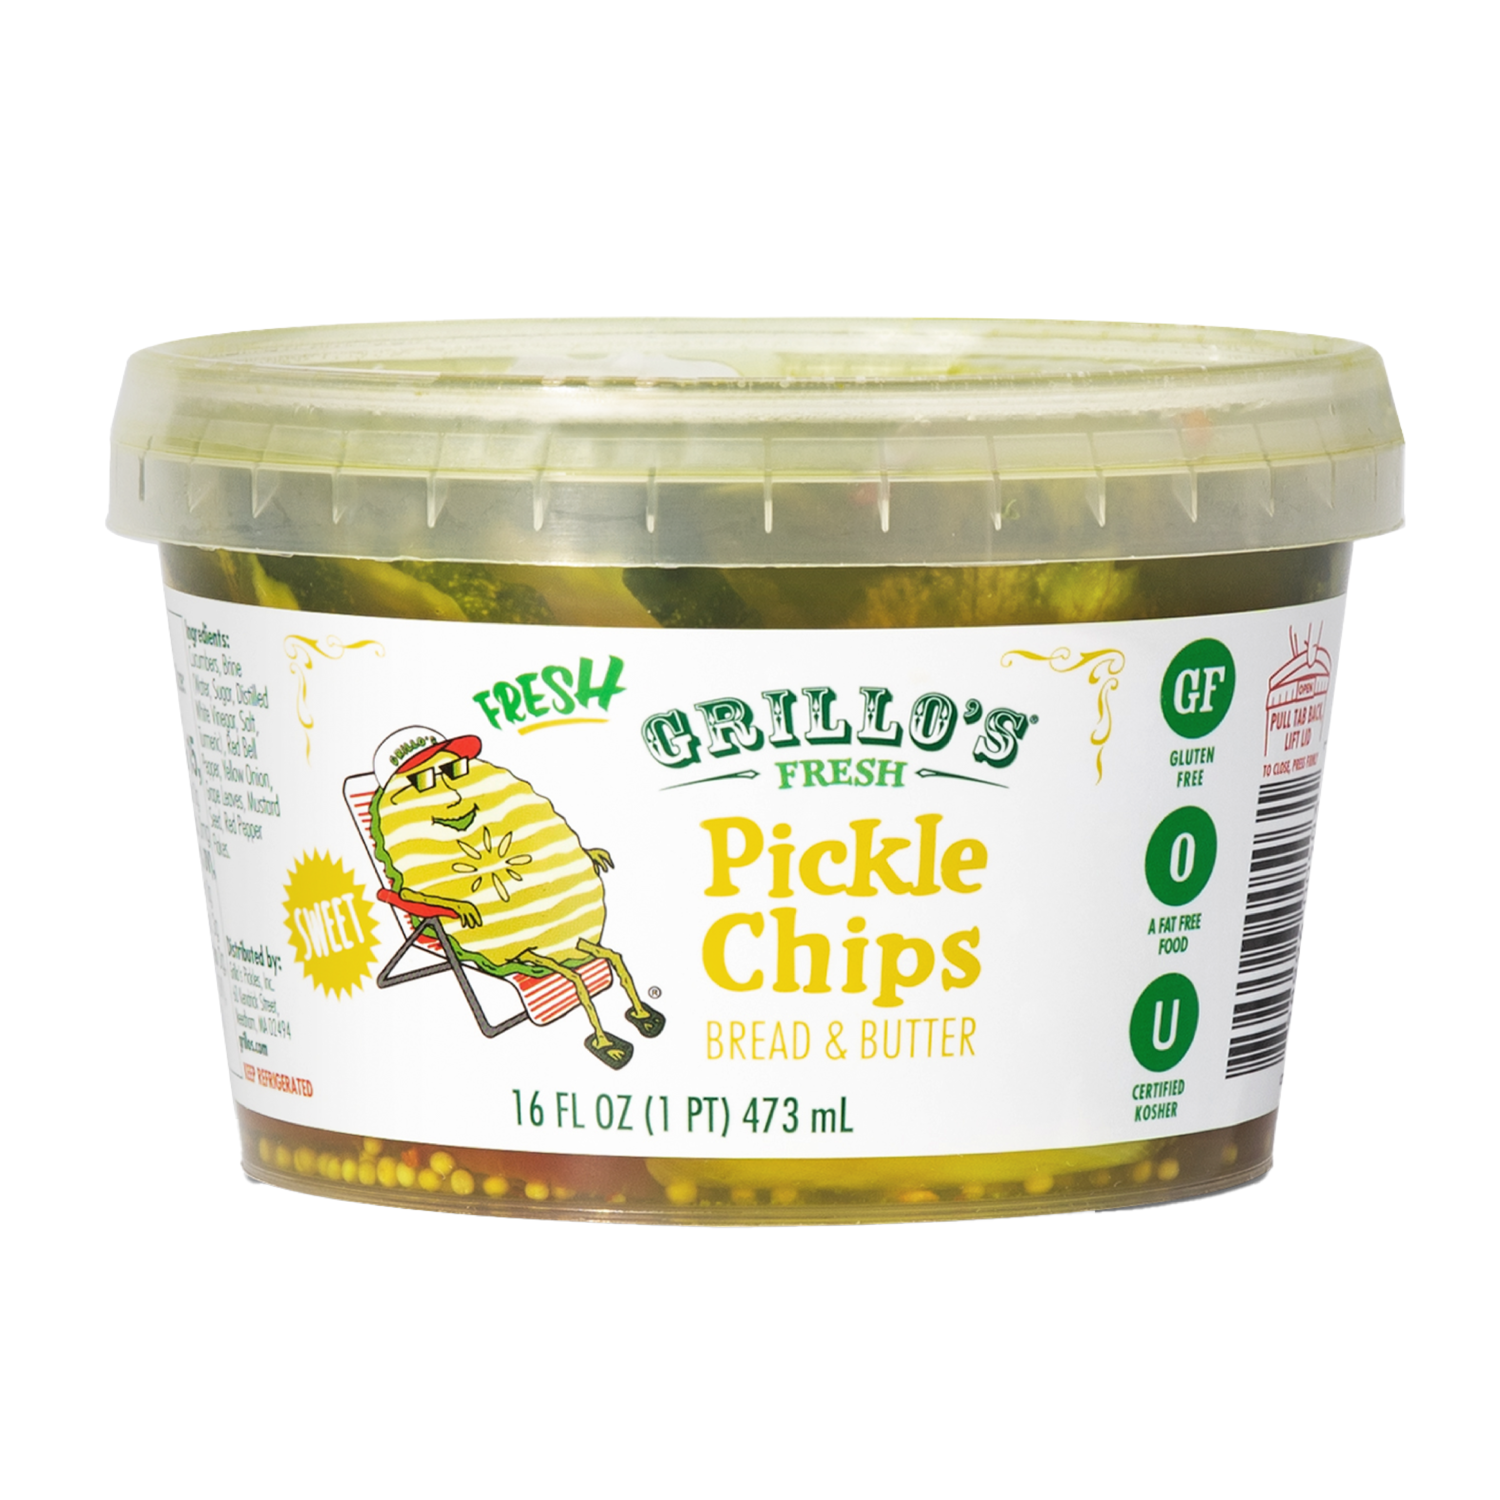 Grillo's Bread and Butter Pickle Chips